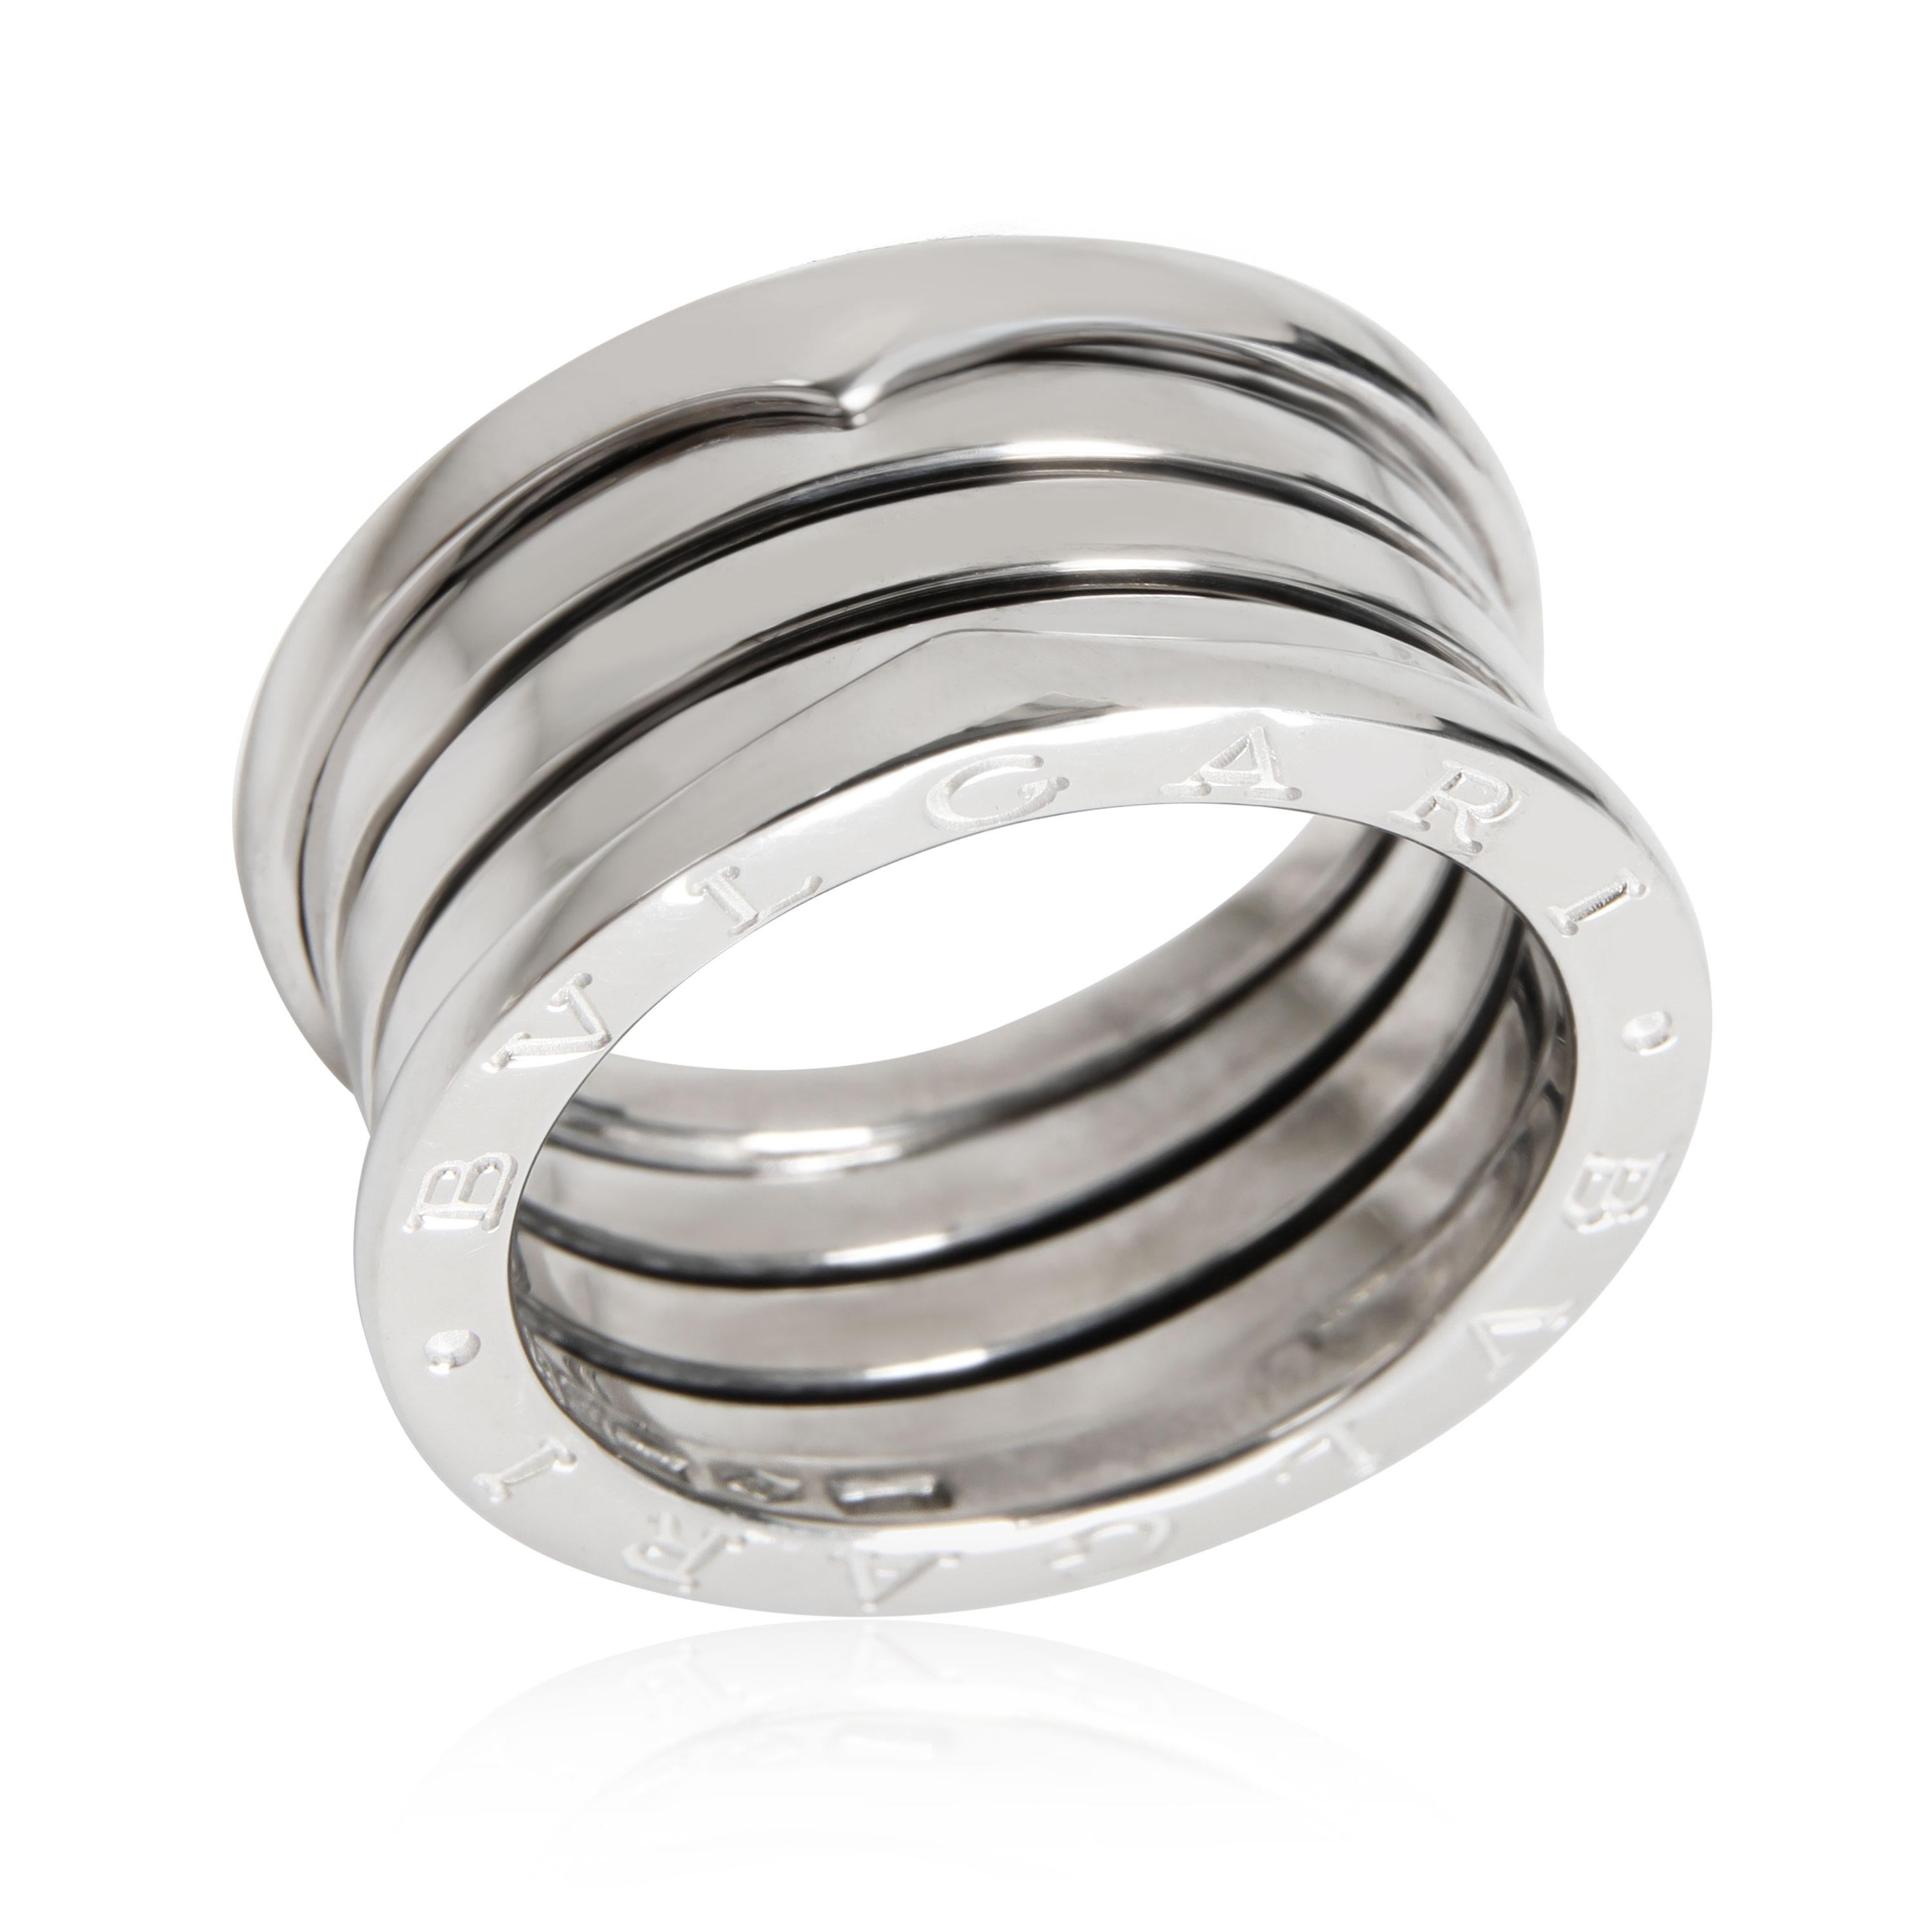 Bulgari B.Zero 4 Spiral Band in 18k White Gold

PRIMARY DETAILS
SKU: 112757
Listing Title: Bulgari B.Zero 4 Spiral Band in 18k White Gold
Condition Description: Retails for 2530 USD. In excellent condition and recently polished. Ring size is